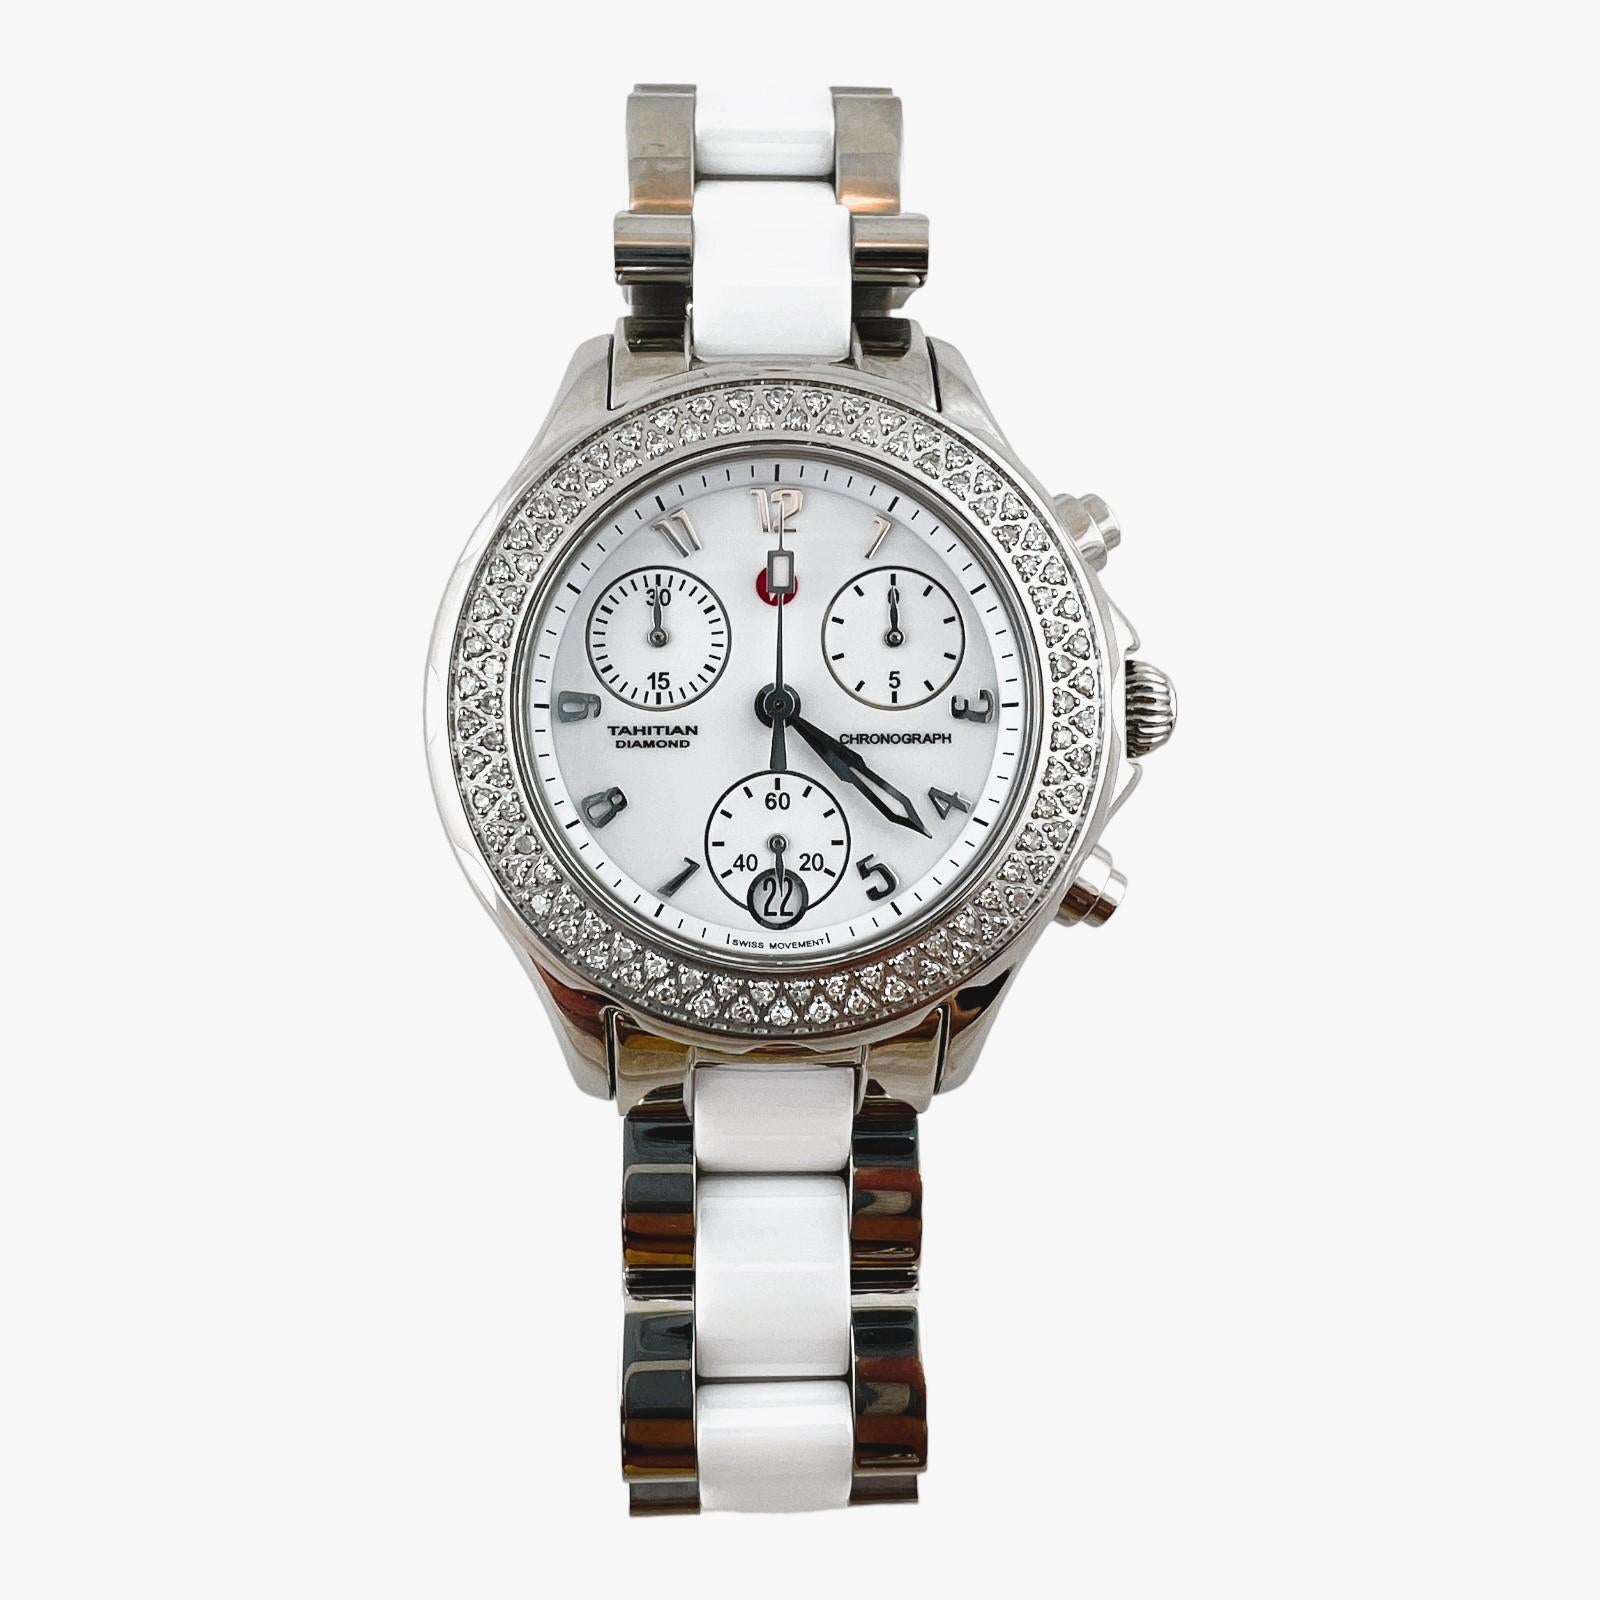 Michele Tahitian Ceramic Stainless Steel Diamond Watch

Model: MWW25877SS
Serial: DUO2587788

Quartz movement

34mm case

Diamond bezel with 100 diamonds at approx. .47cts total weight

Fits up to 6